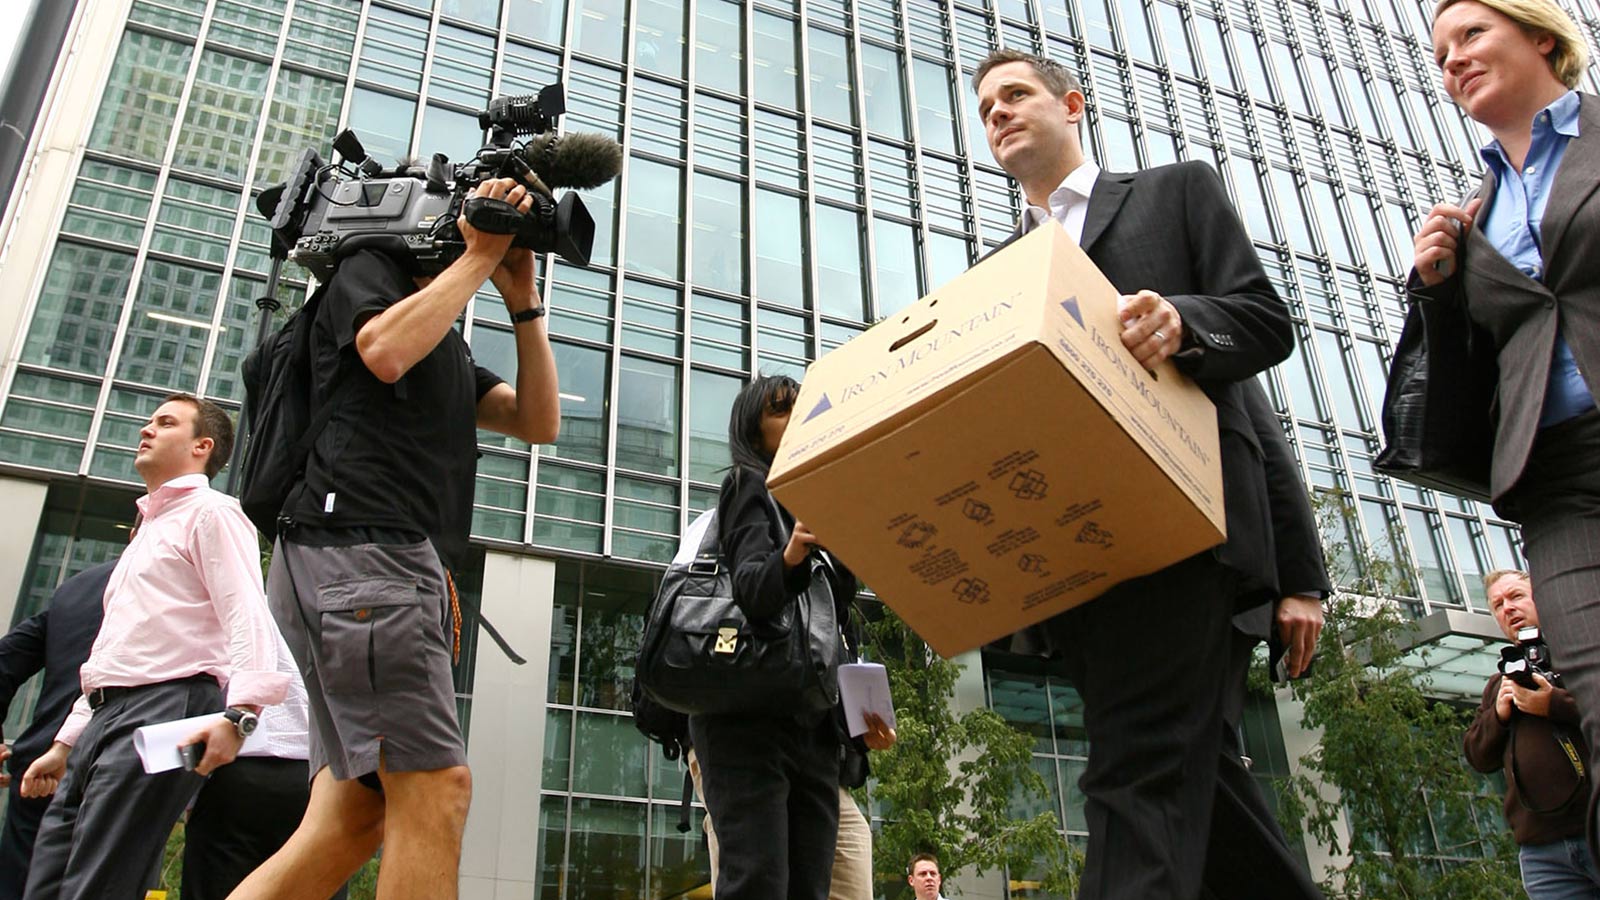 A UK employee of Lehman Brothers carrying a box after clearing his desk when the US investment firm declared bankruptcy, London, September 15, 2008